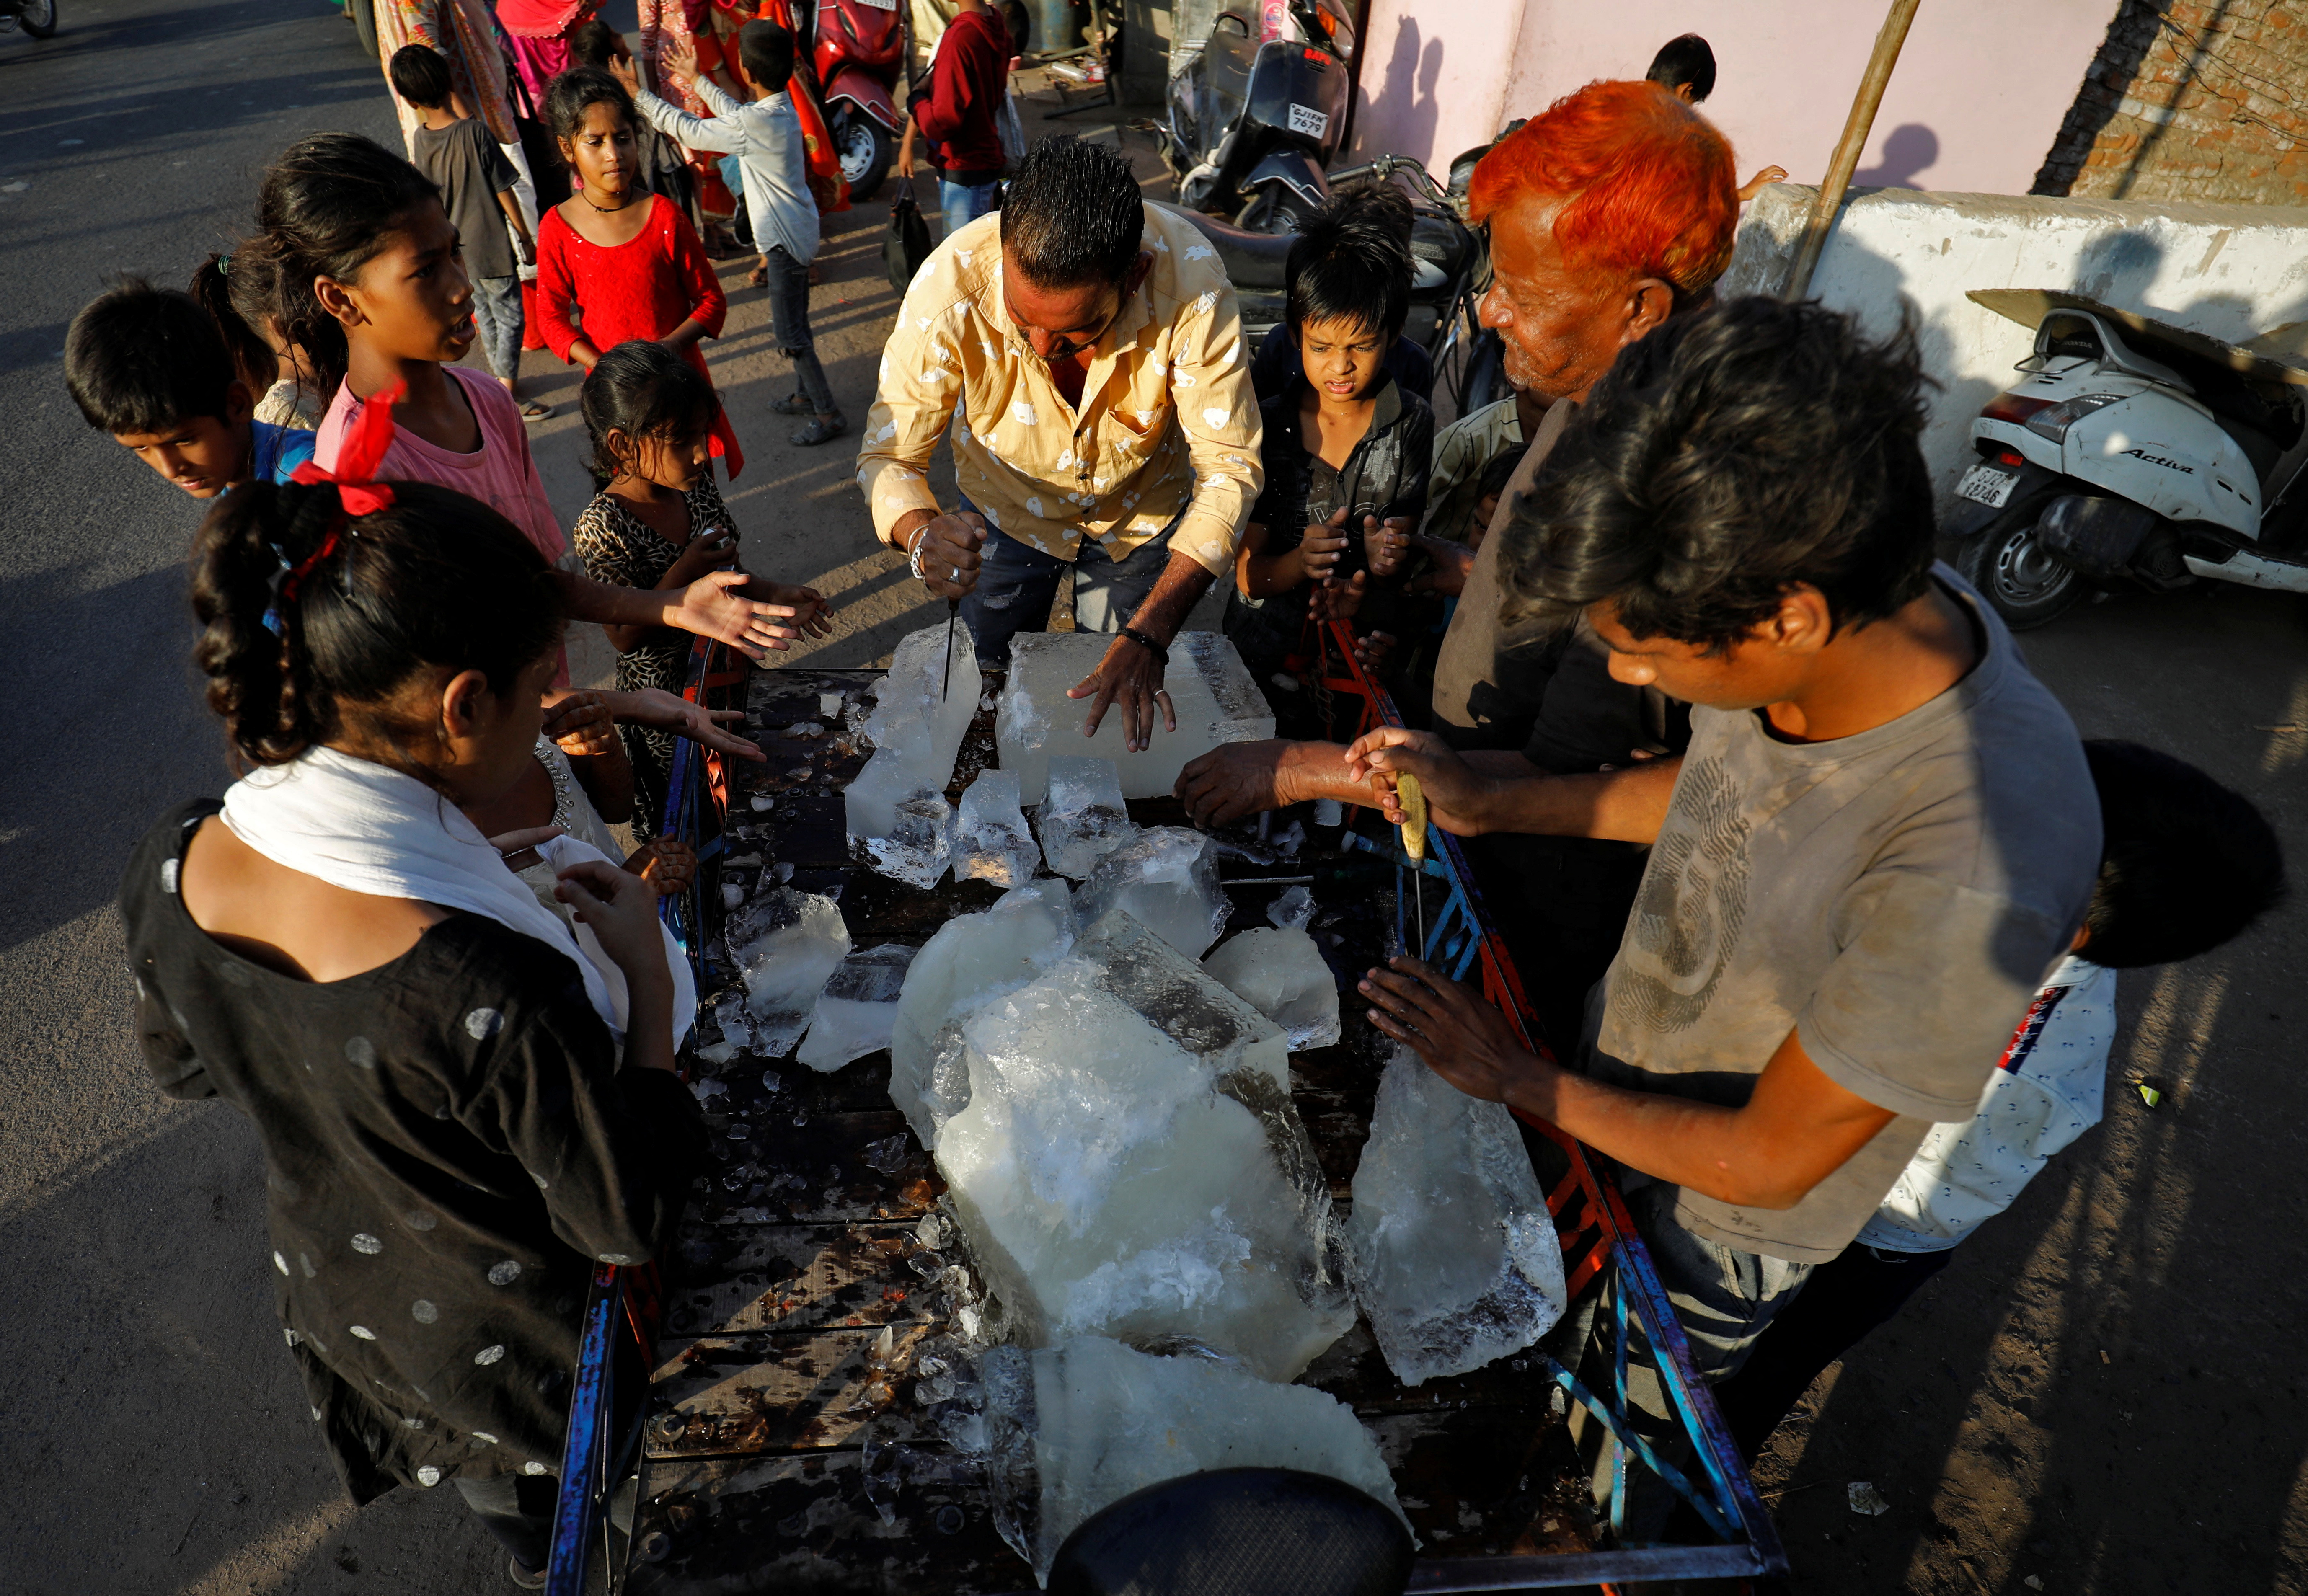 A man breaks a block of ice to distribute it among the residents of a slum during hot weather in Ahmedabad